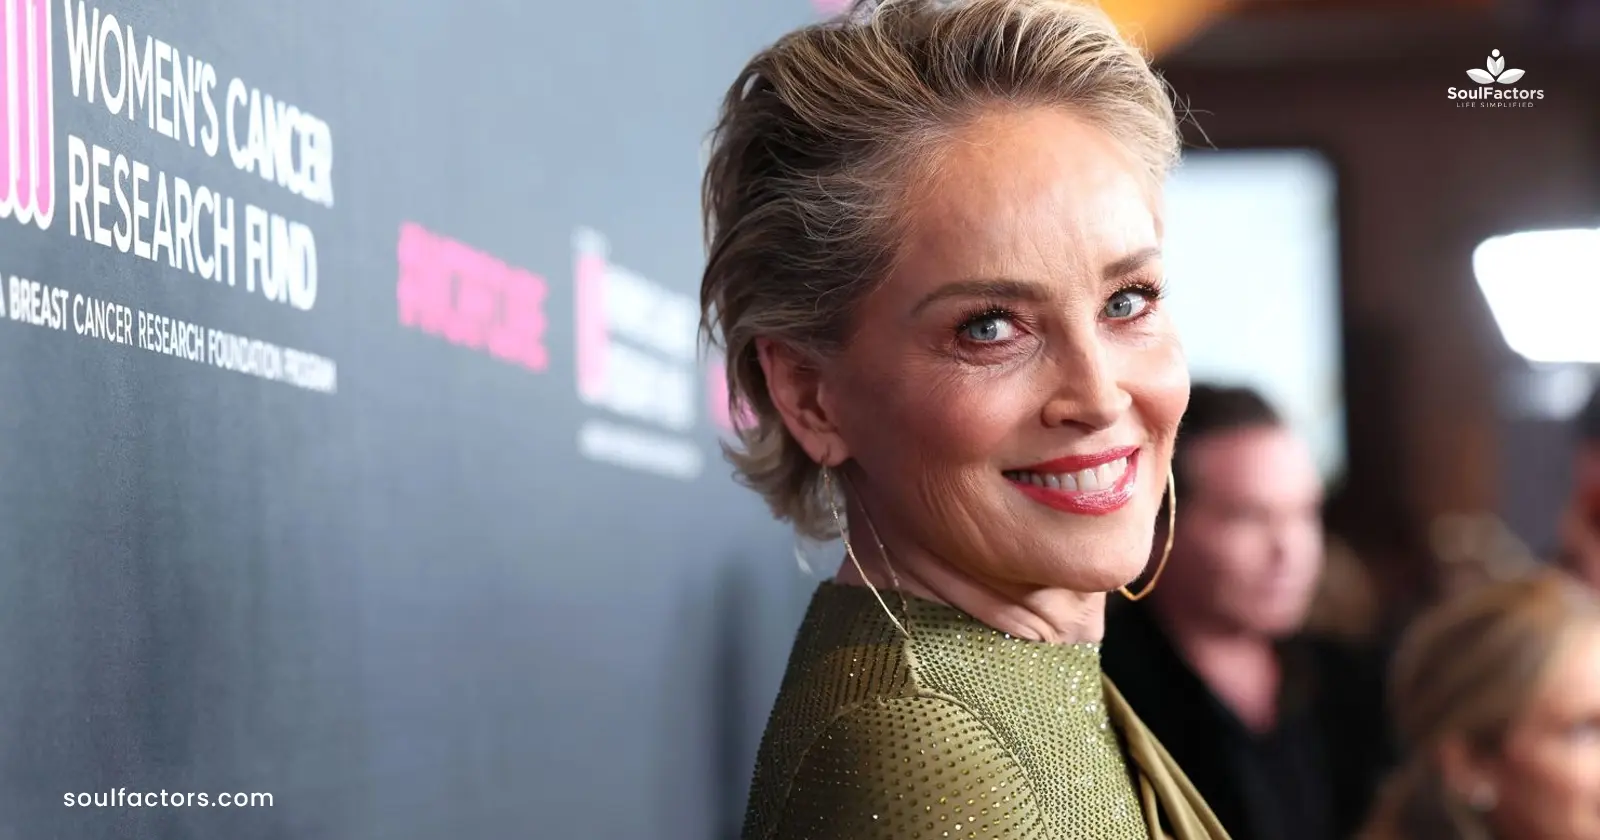 Sharon-Stone-names-producer-who-‘told-her-to-sleep-with-co-star-